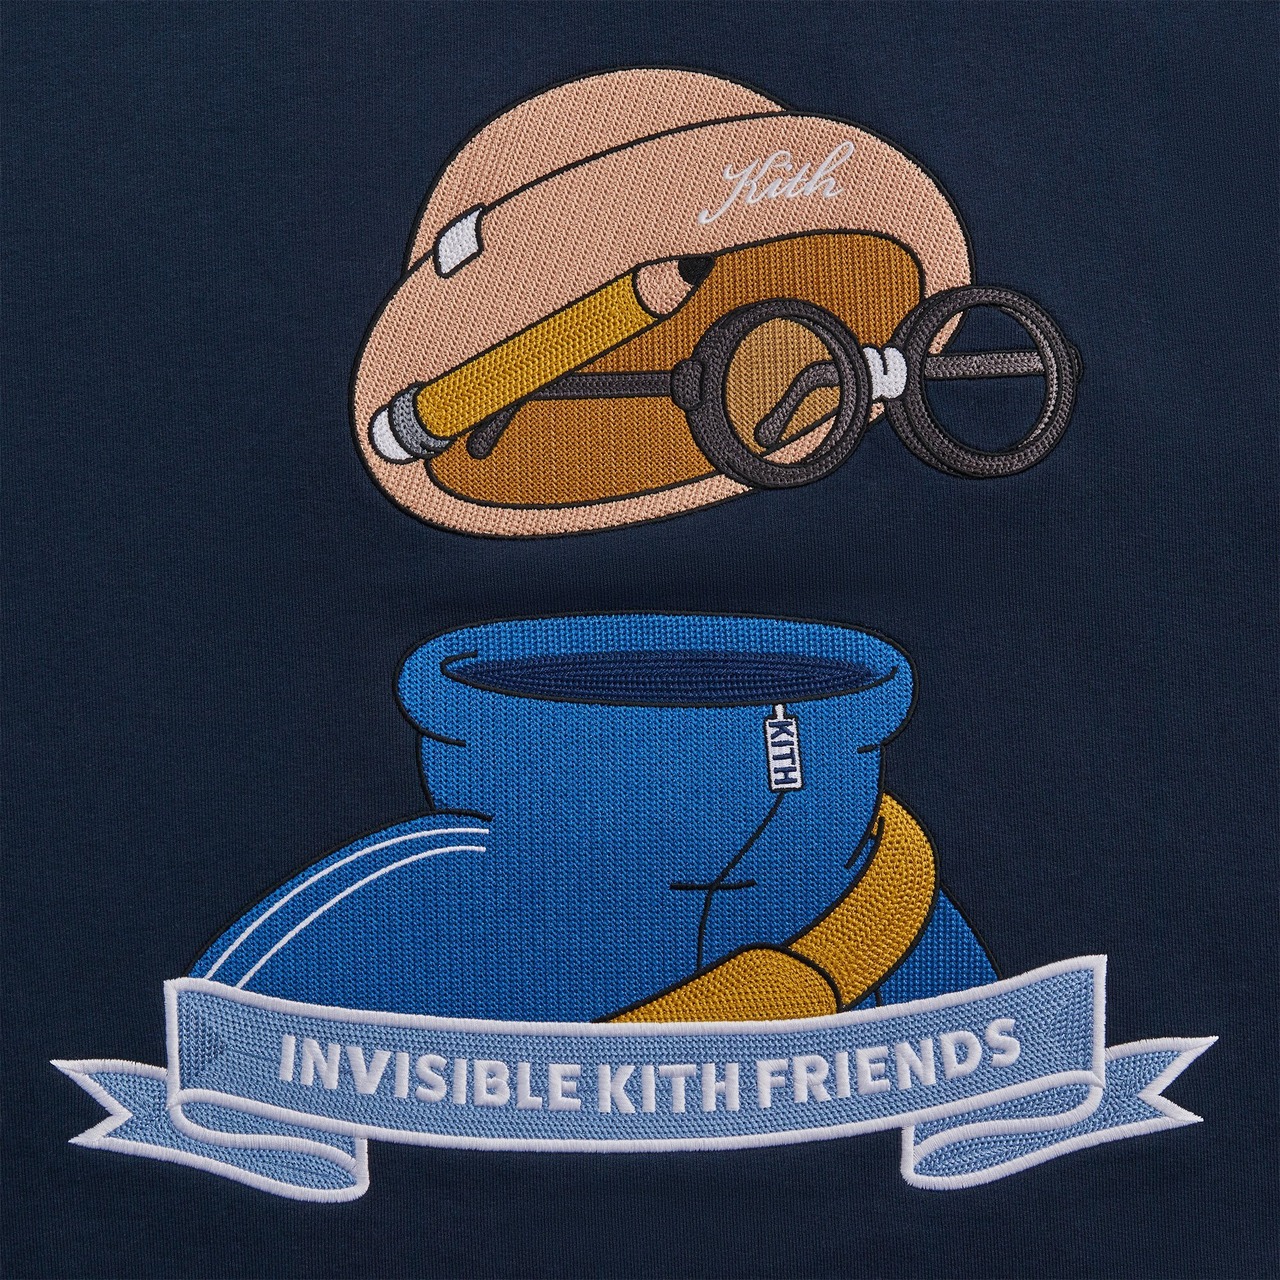 KITH x Invisible Friends Large. Crewneck Sweater, Navy Blue